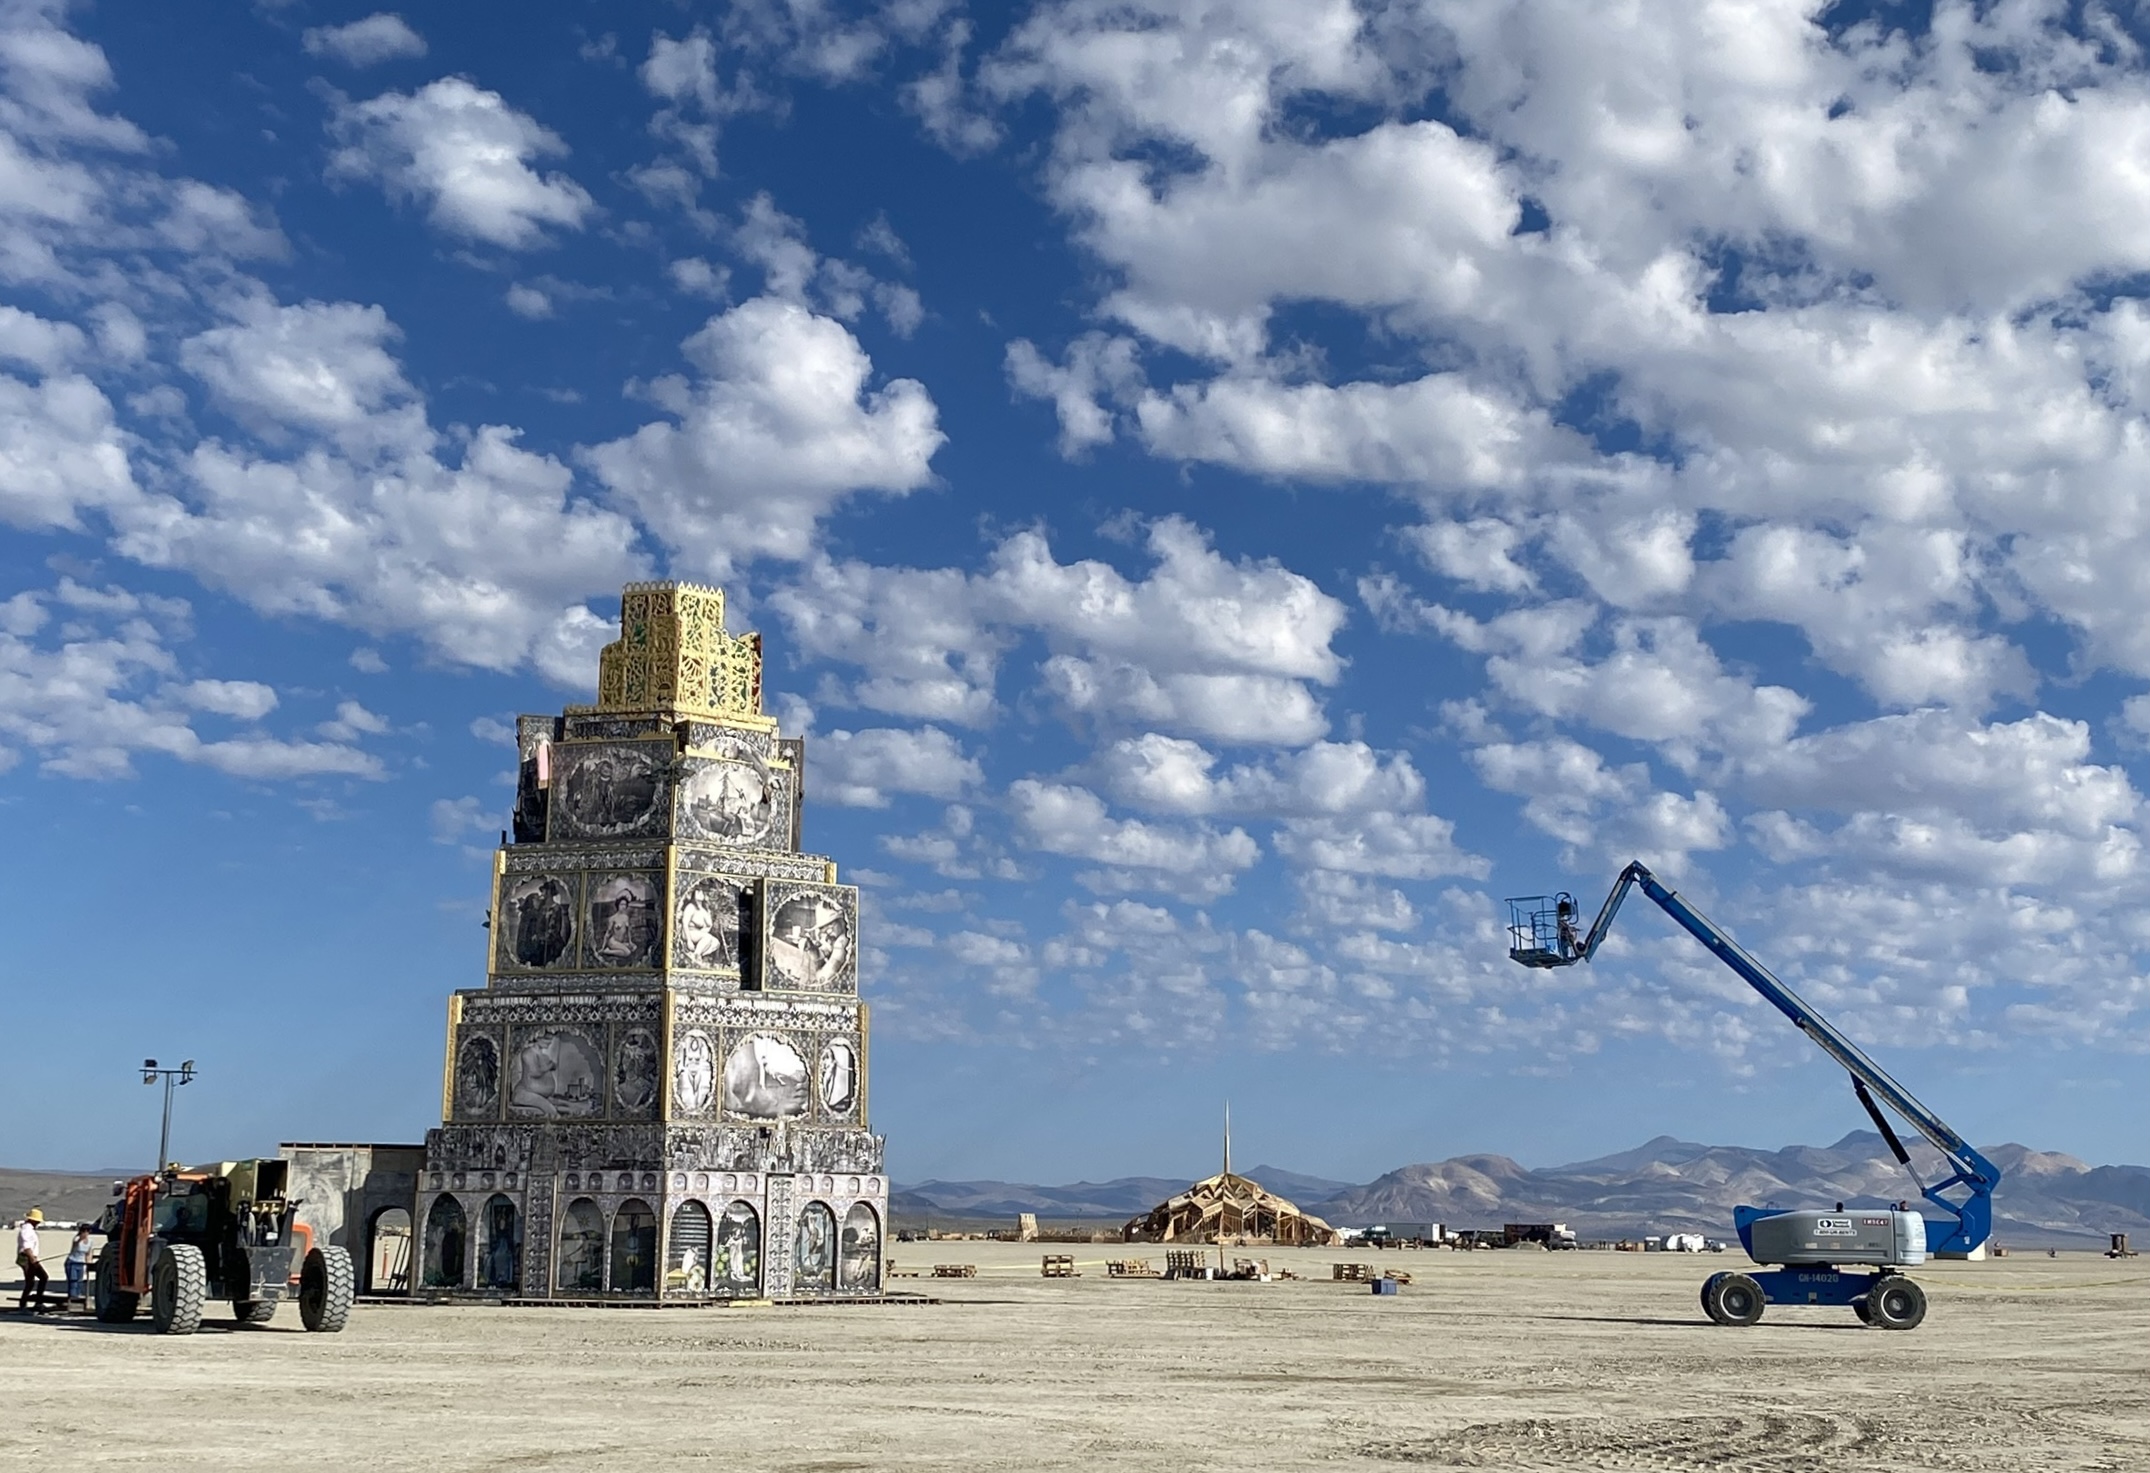 Crews construct the “Chapel of Babel” ahead of Burning Man 2023. As of Thursday, Aug. 24, 2023, its crews appeared to be reaching the “finishing touch” stages of longtime Burning Man artist Michael Garlington’s final sculpture for the playa.